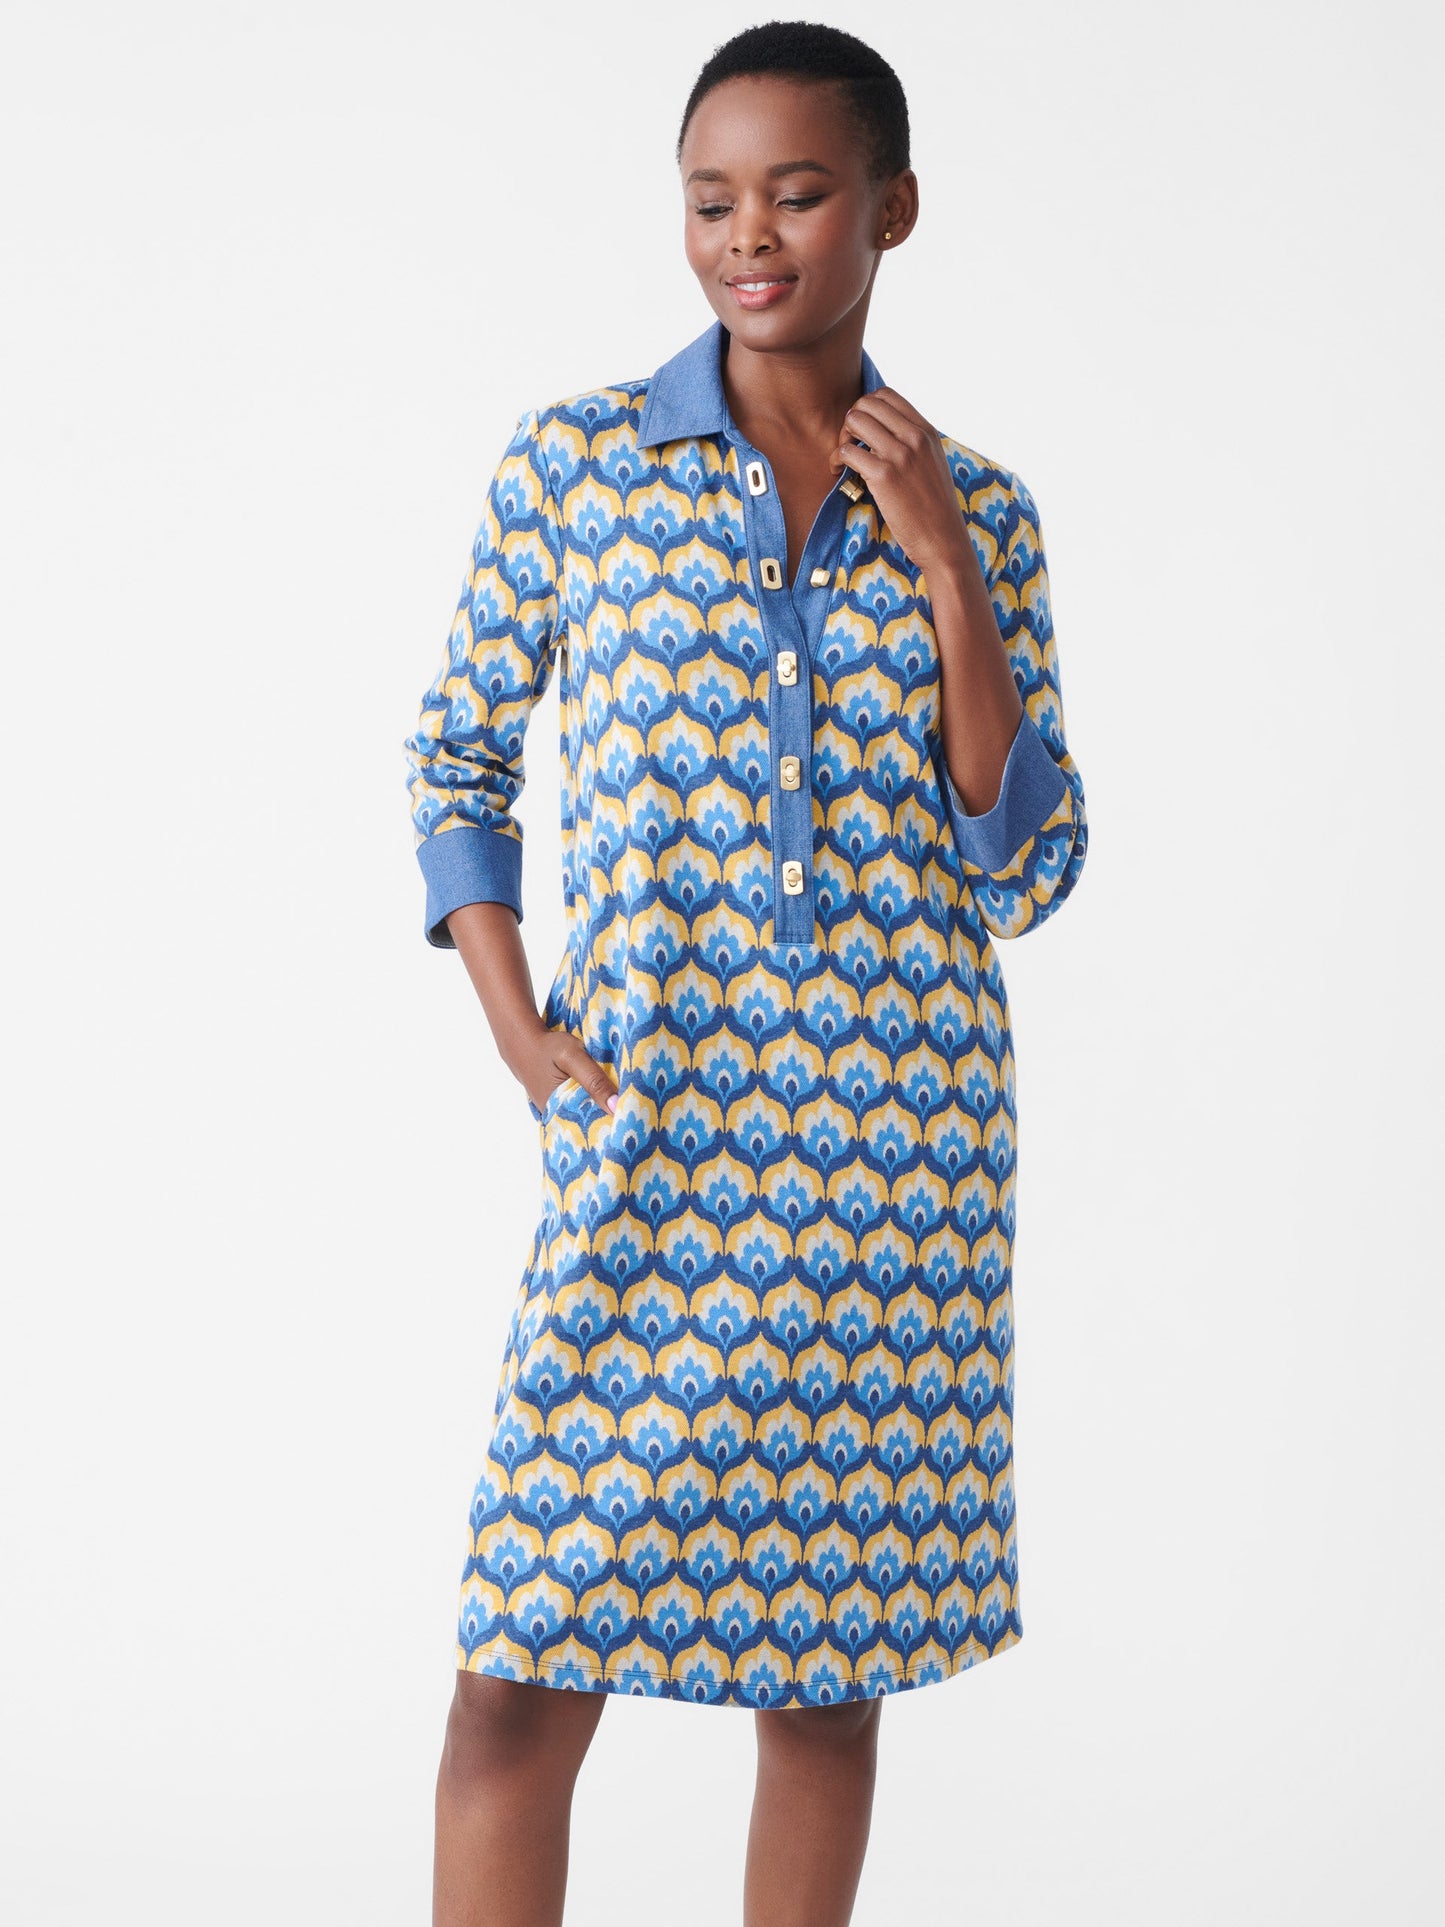 Model wearing J.McLaughlin Bryony dress in denim/gold made with cotton/polyester/elastane.